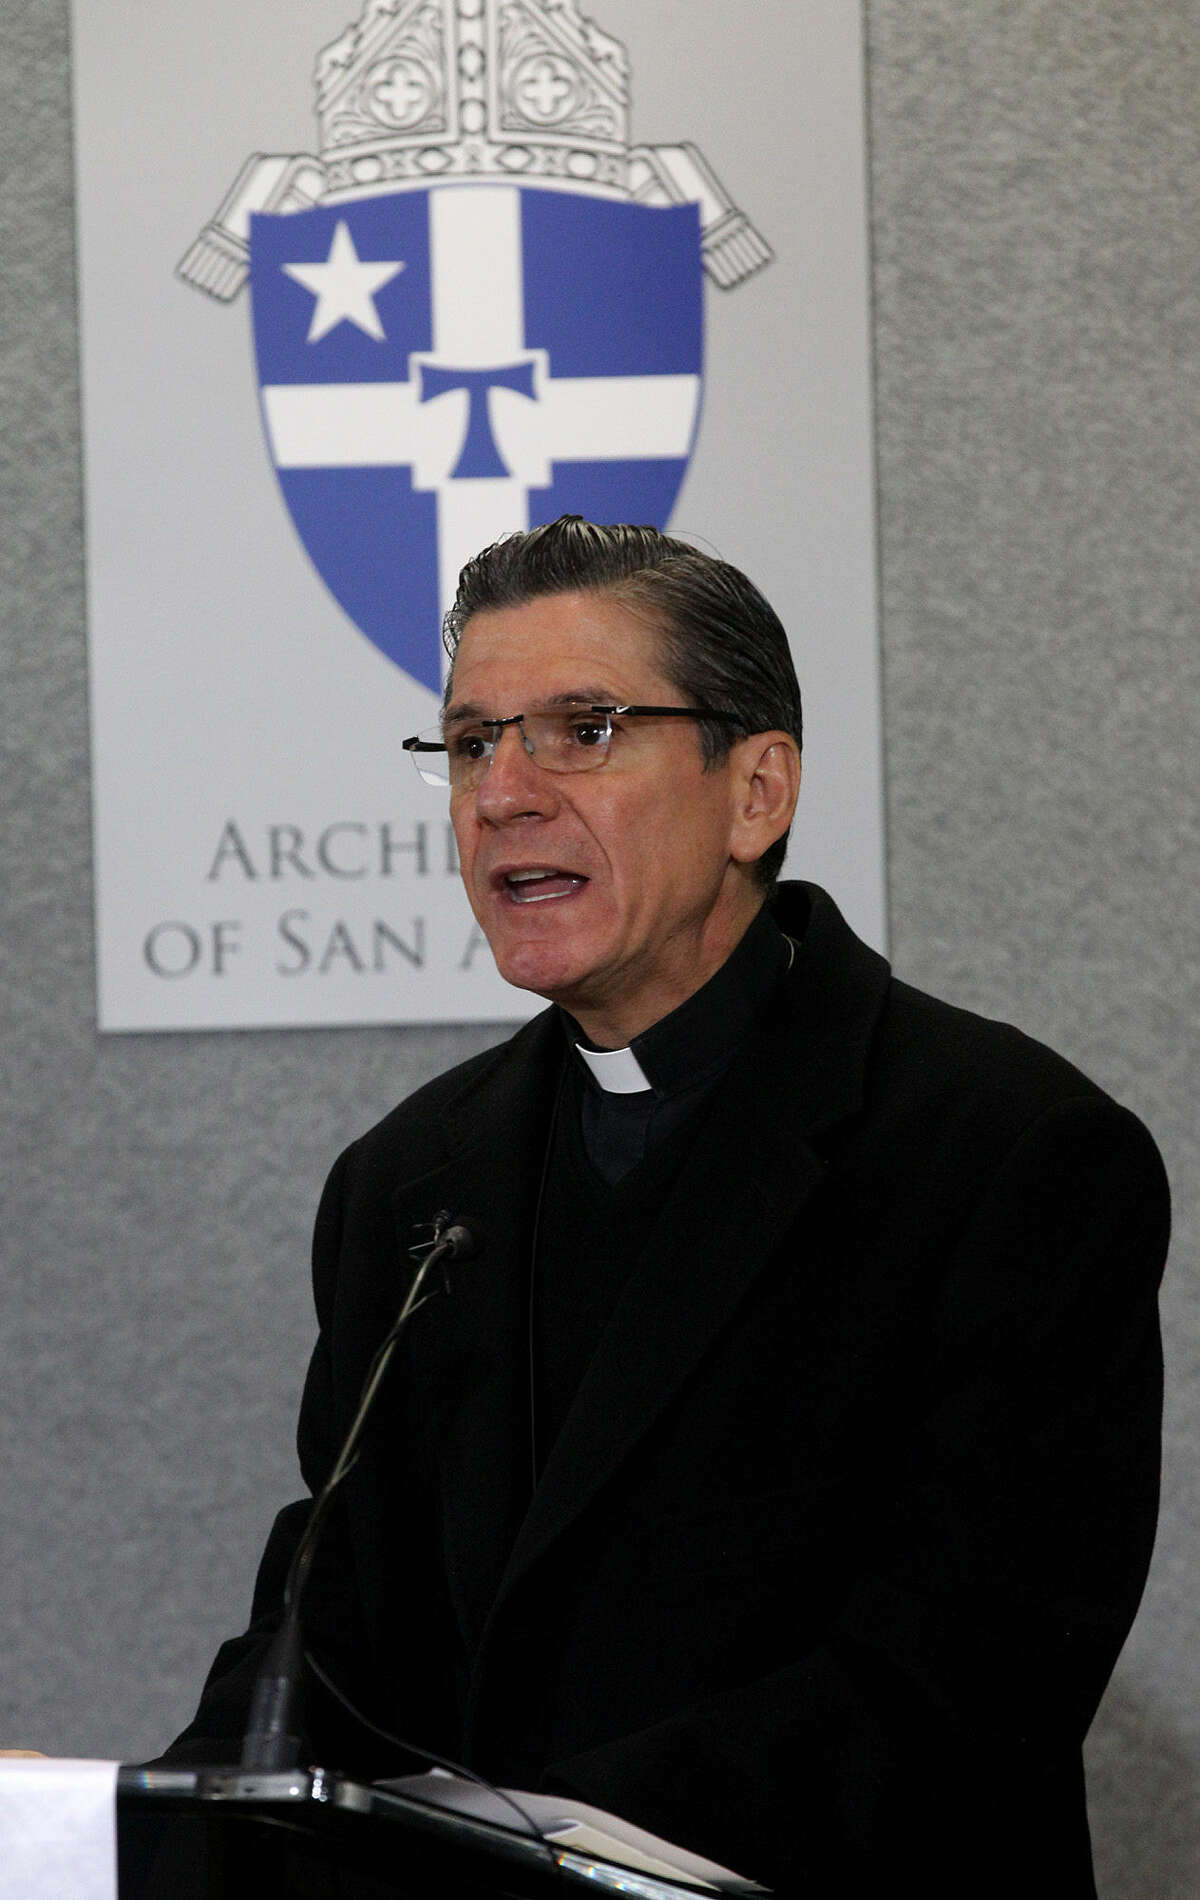 San Antonio Archbishop Gustavo García-Siller said, “We believe it is imperative that the people of the United States see the broken immigration system of this land comes with tragic human cost: Families are torn apart, children are separated from their mothers and fathers.”